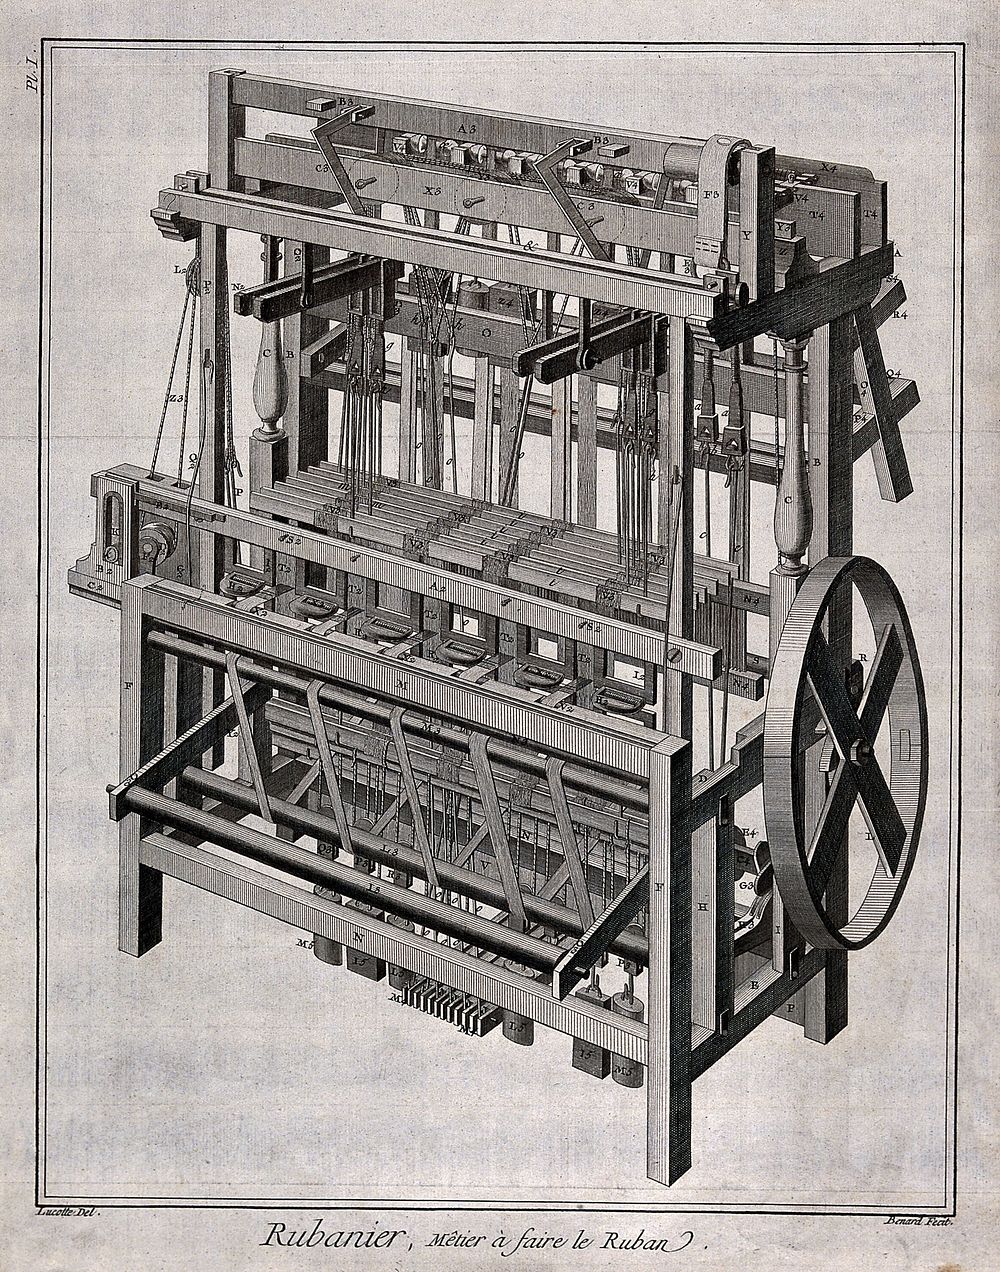 Textiles: a loom for ribbon weaving. Engraving by R. Benard after J.-R. Lucotte.